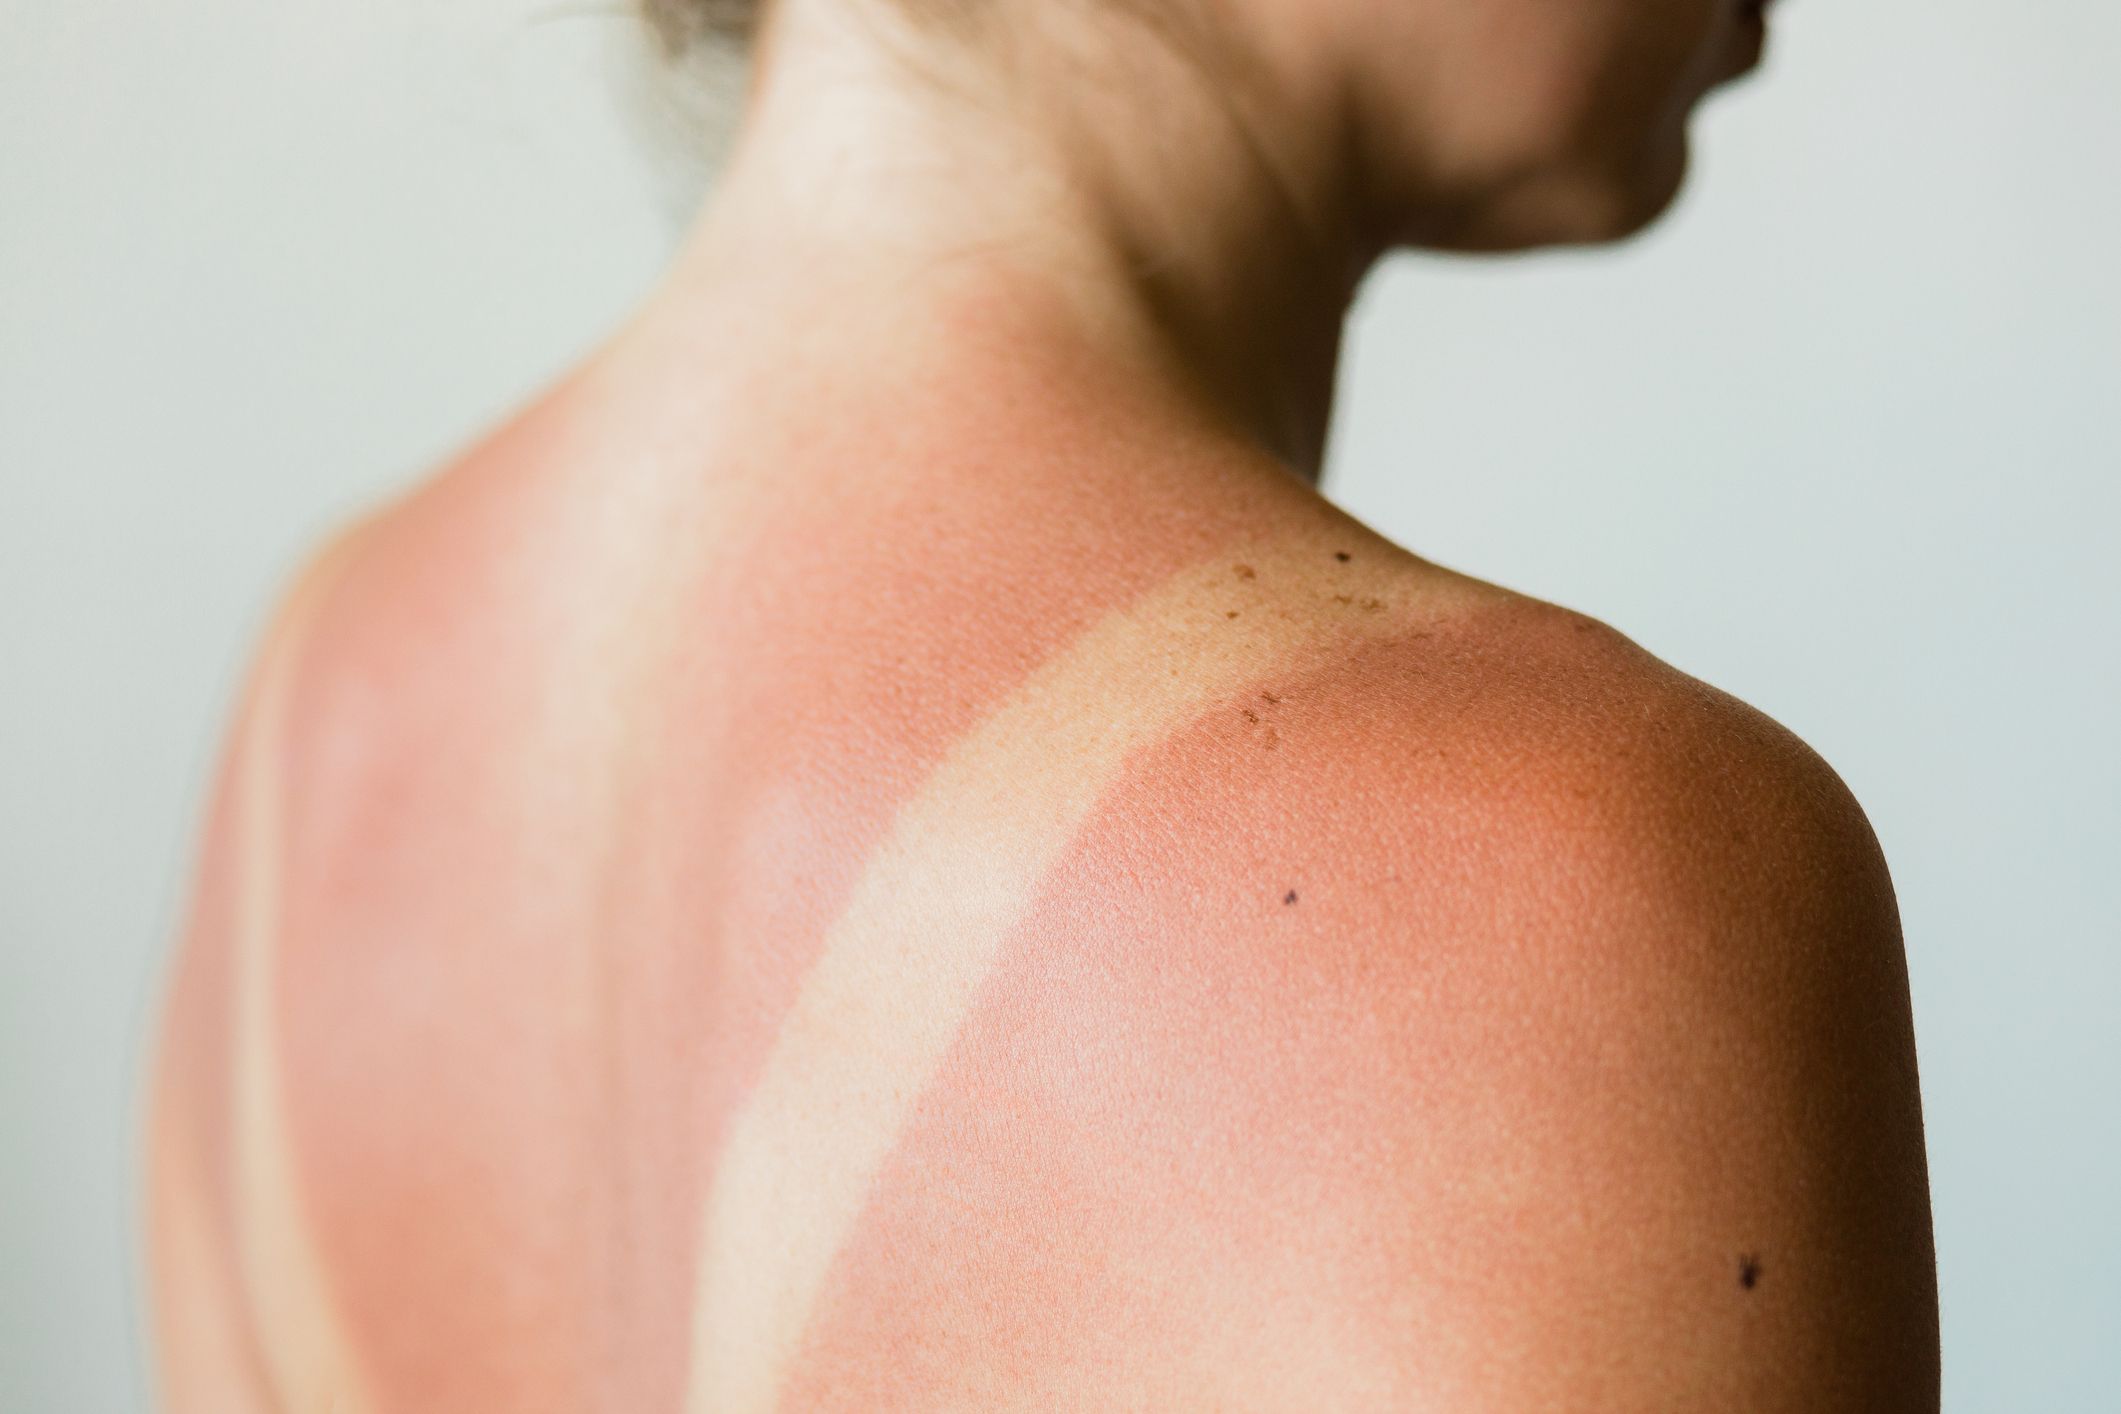 Home Remedies for Sunburns – Cleure